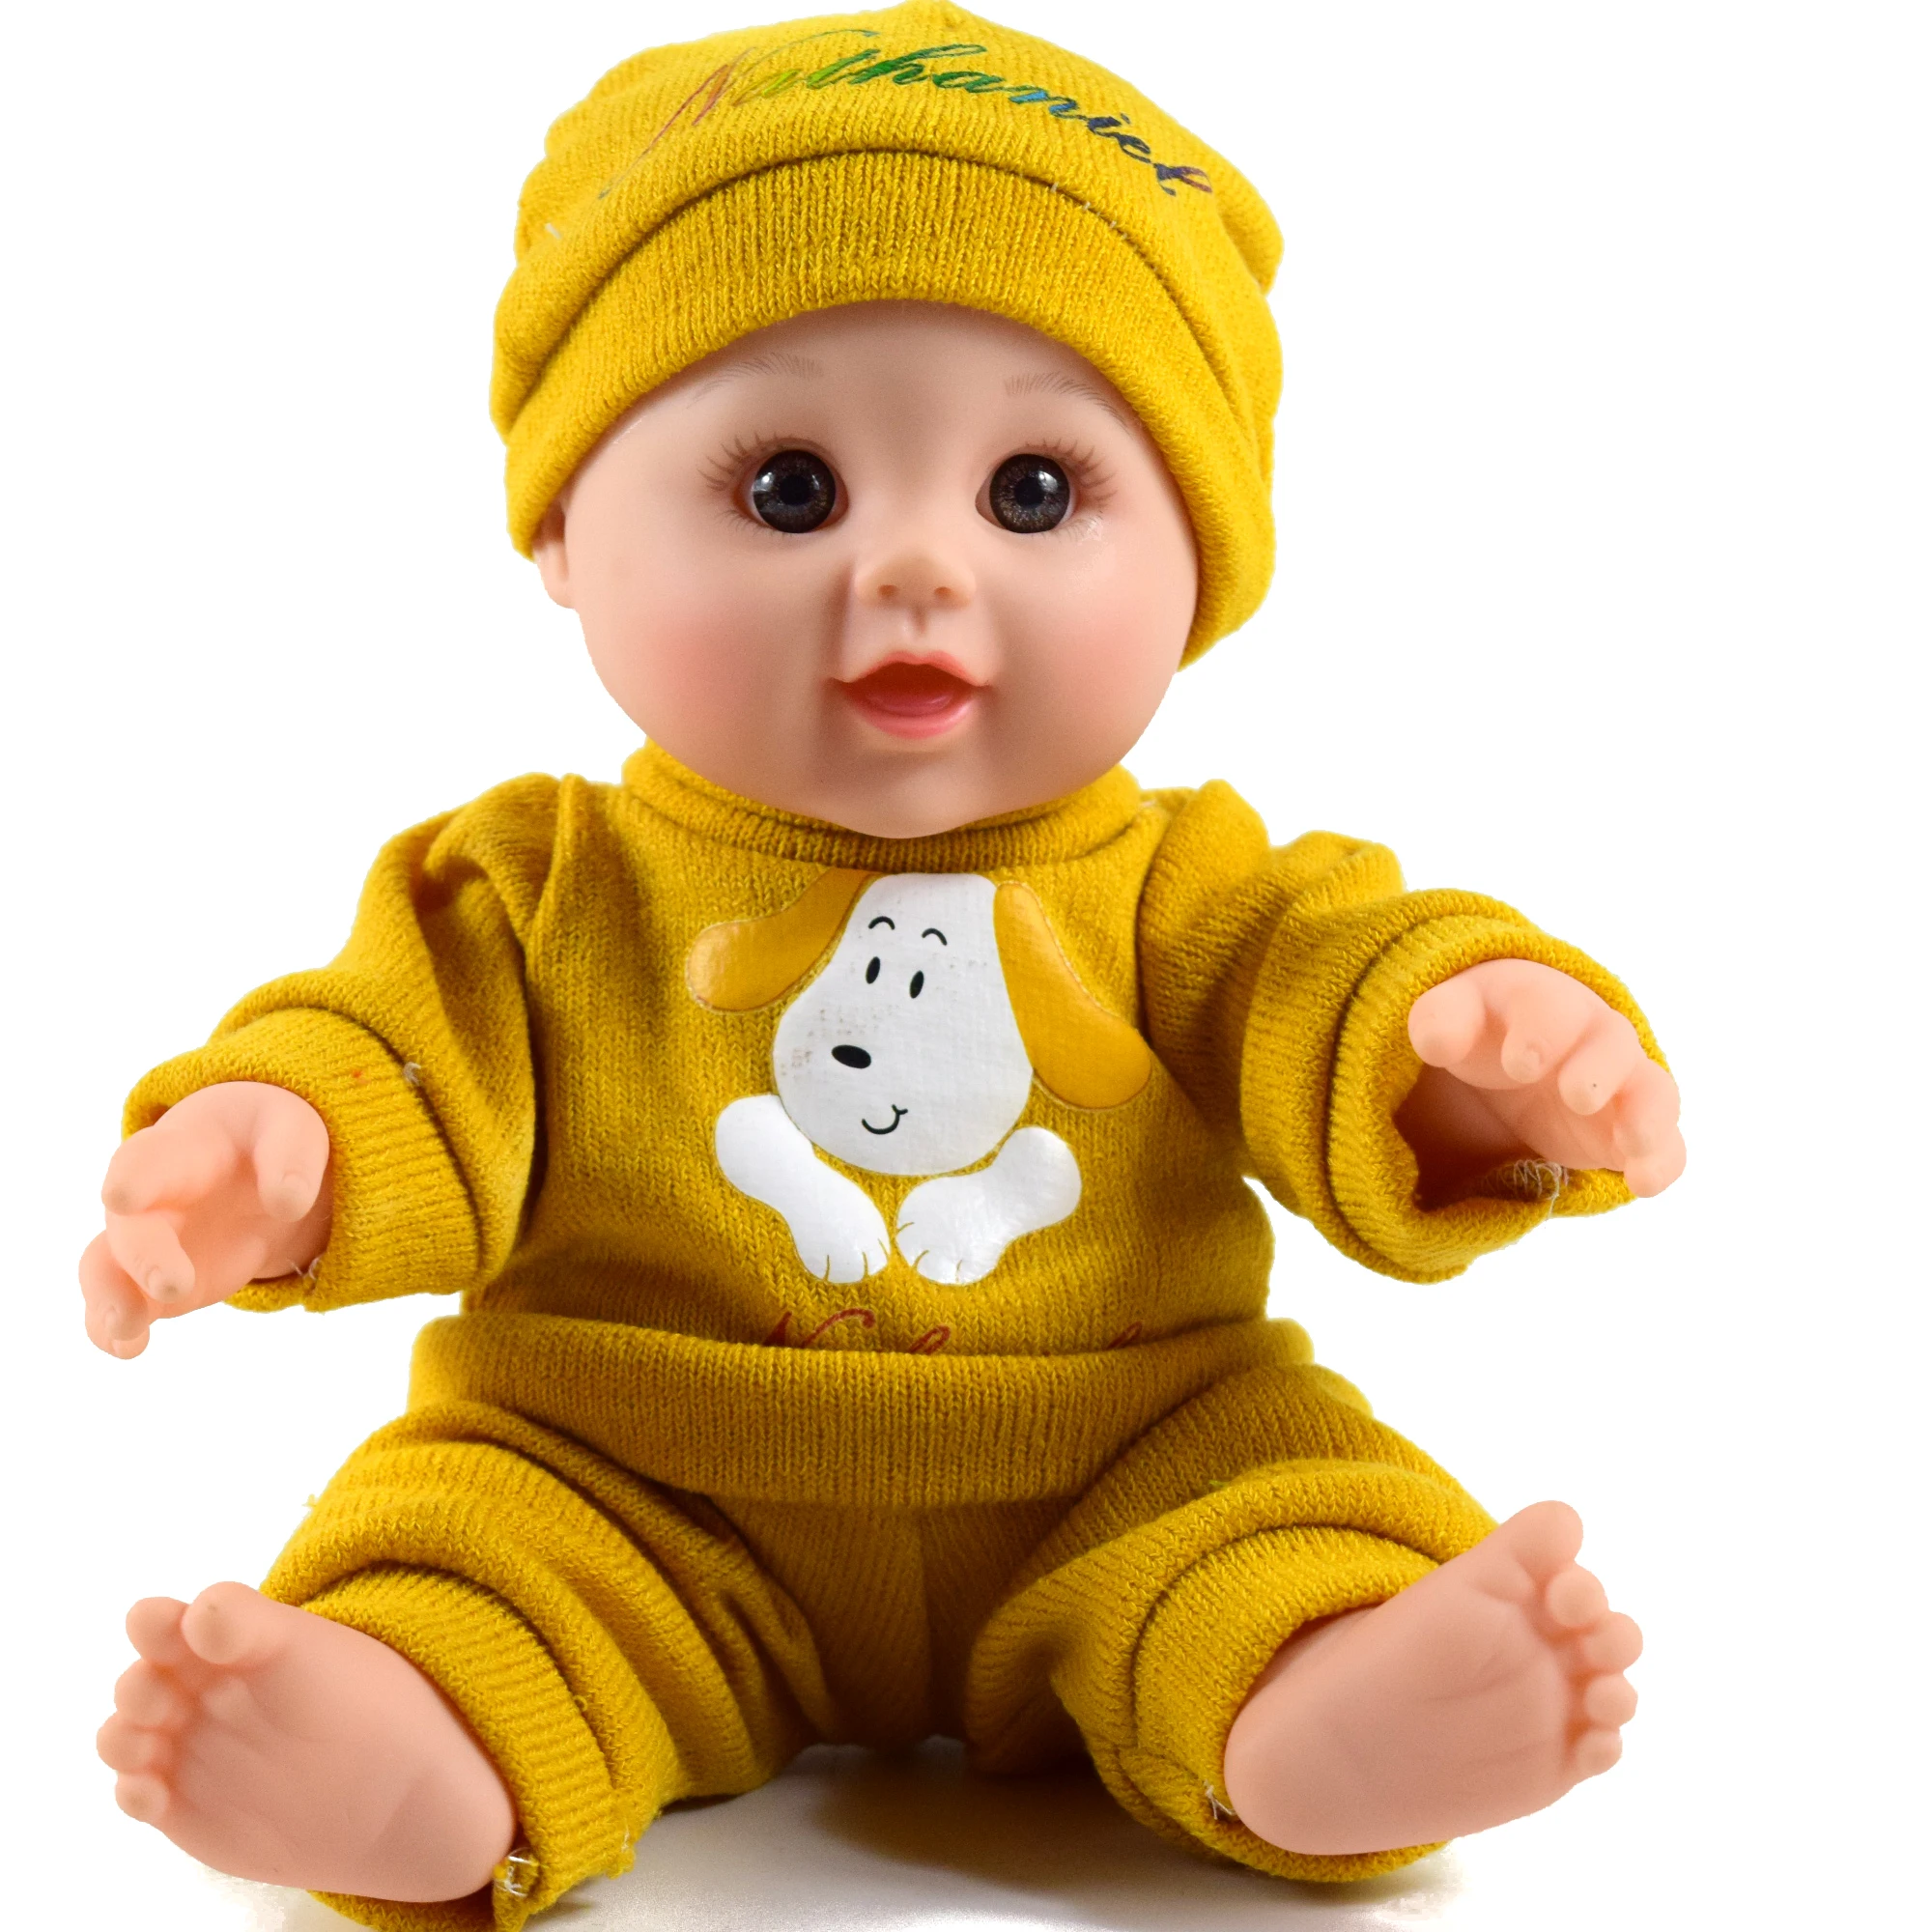 2021 hot sale 12 inch silicone baby fashion doll for kids as gifts